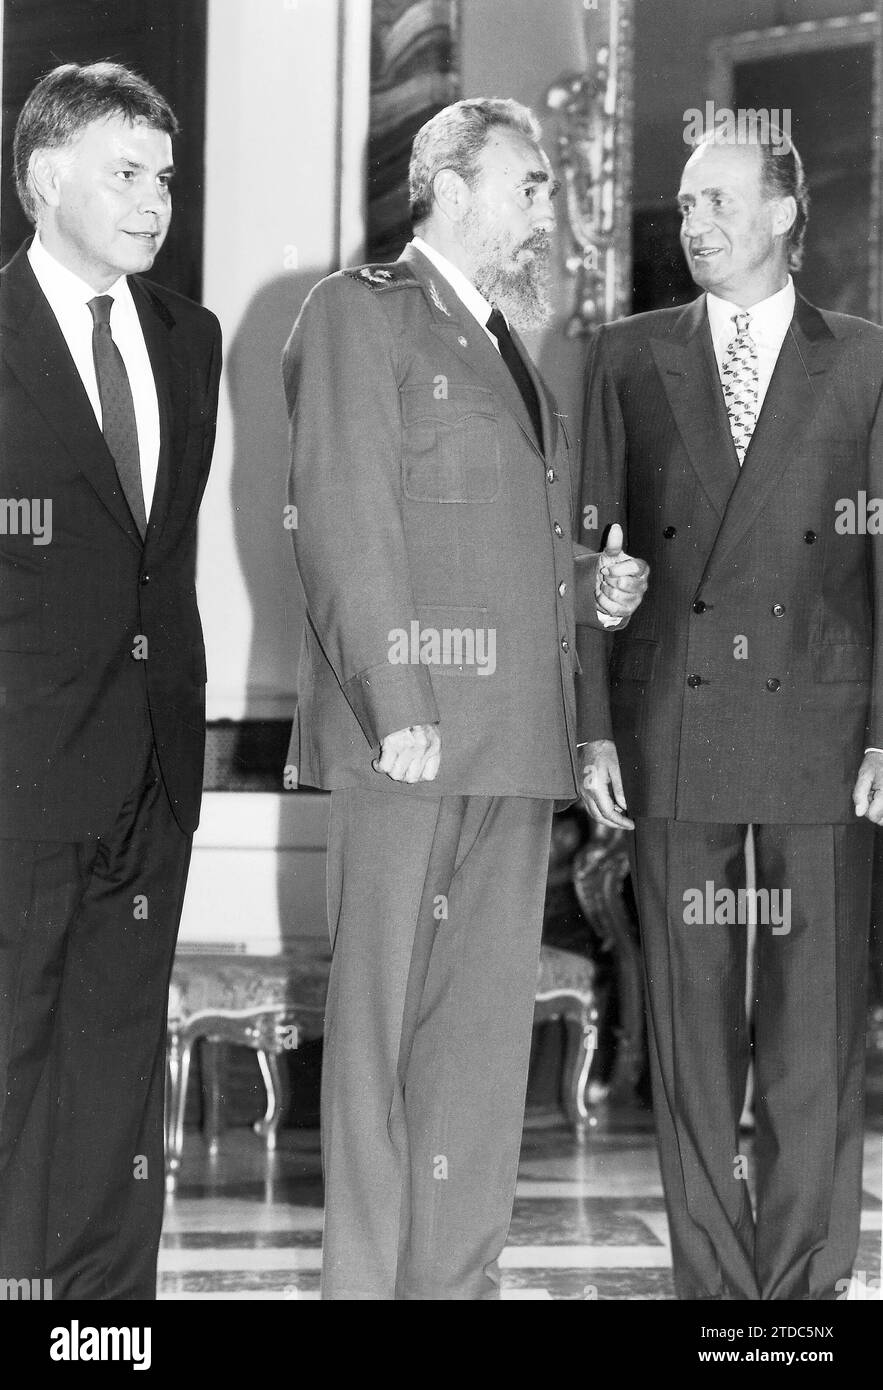 07/23/1992. Fidel Castro together with King Juan Carlos and the president of the government Felipe González at the inauguration of the II Ibero-American summit. Credit: Album / Archivo ABC / Jaime García Stock Photo